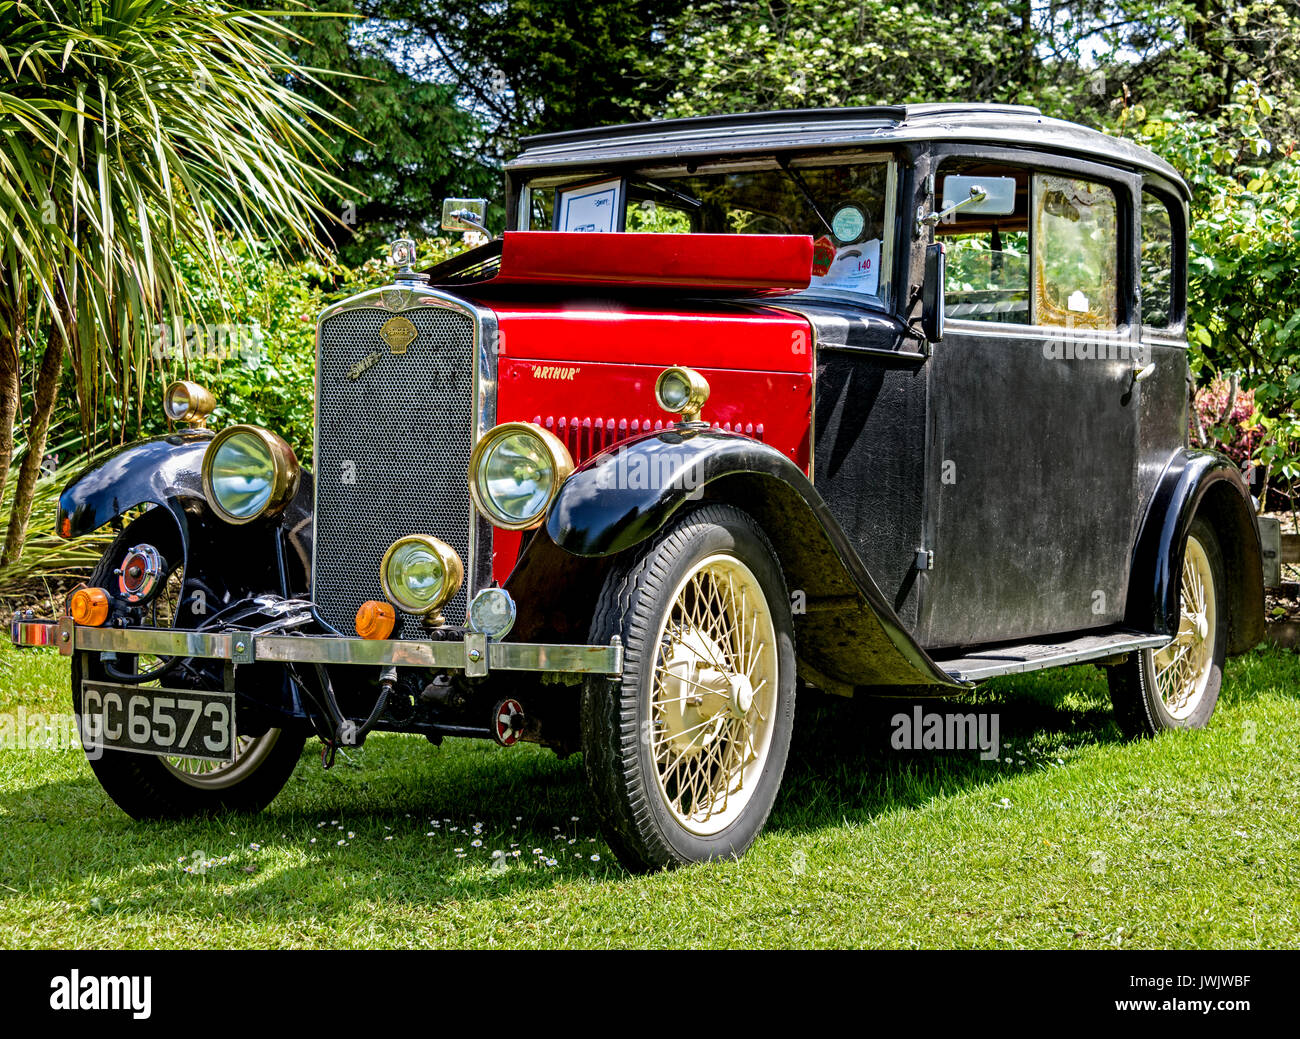 Low-angle, front three quarter view of the 1929 Swift Foursome Coupe on display in a garden setting Stock Photo